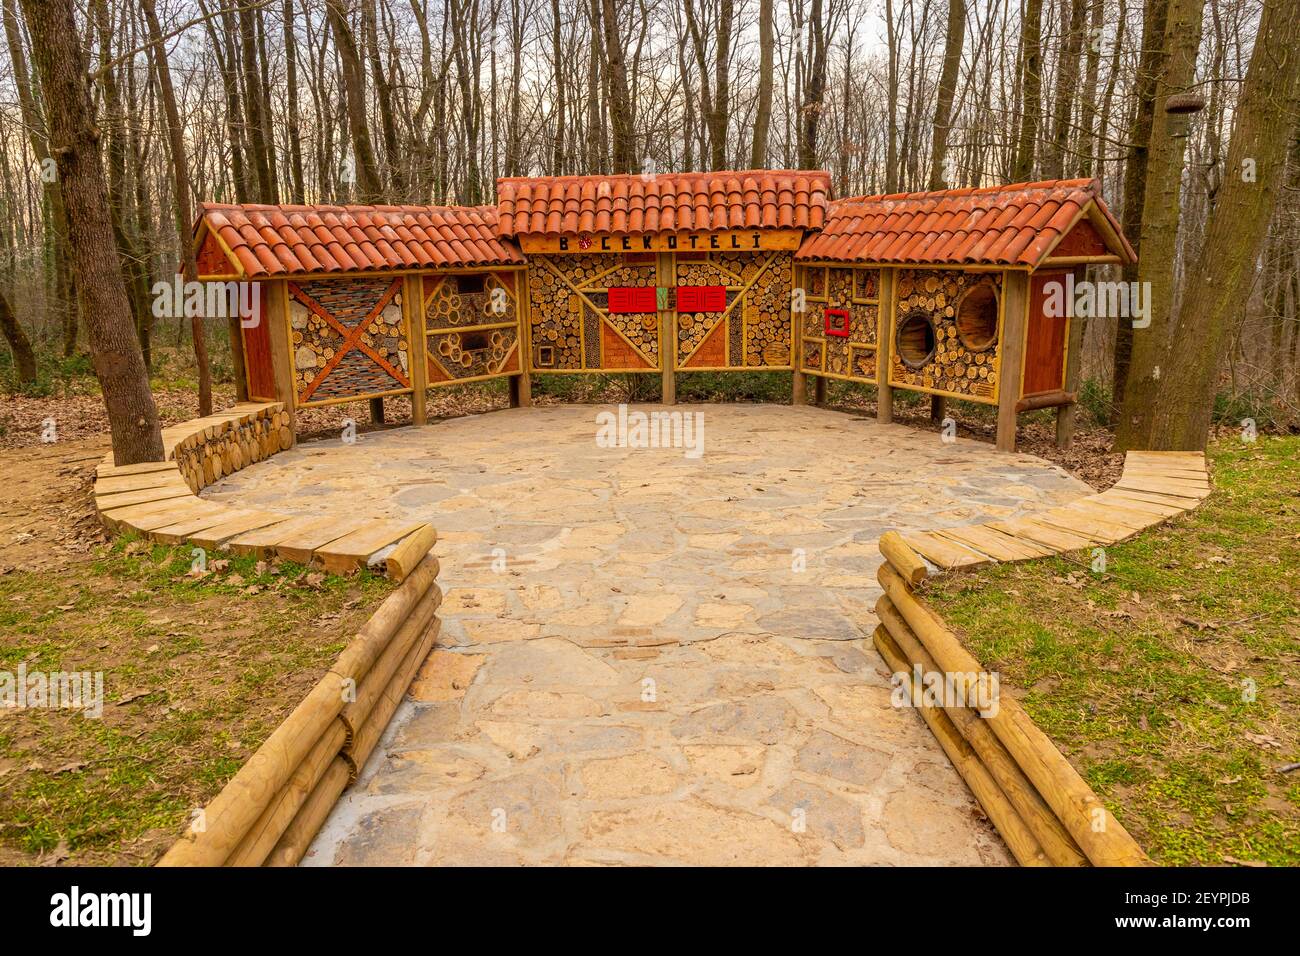 Ormanyan Izmit City Park, colorful wooden houses for tourism inspired by the movie The Hobbit, March 6, Kocaeli, Turkey Stock Photo